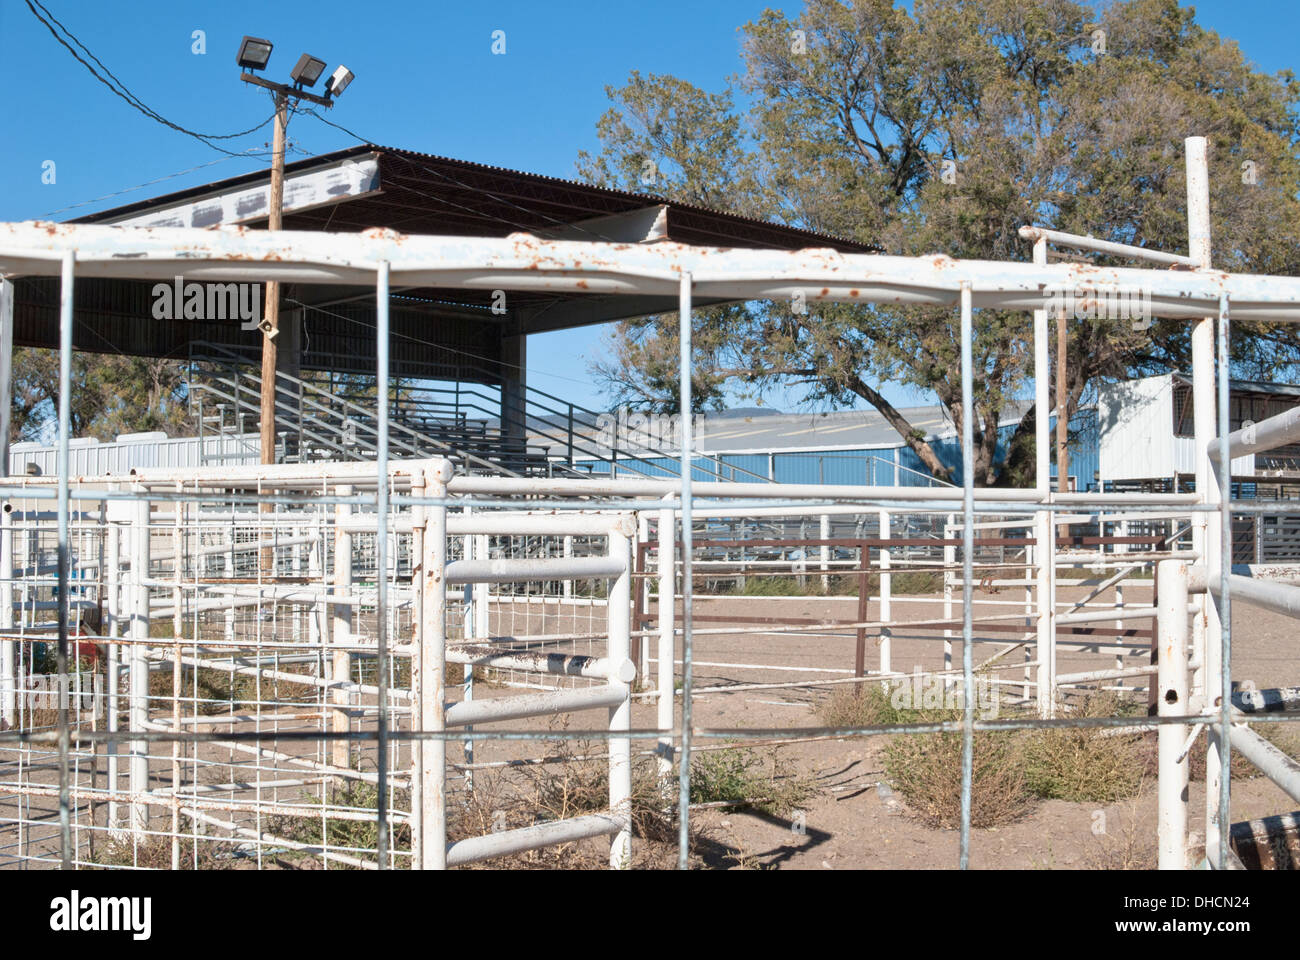 The fairgrounds in Capitan is the location for the Lincoln County Fair and rodeo. Stock Photo